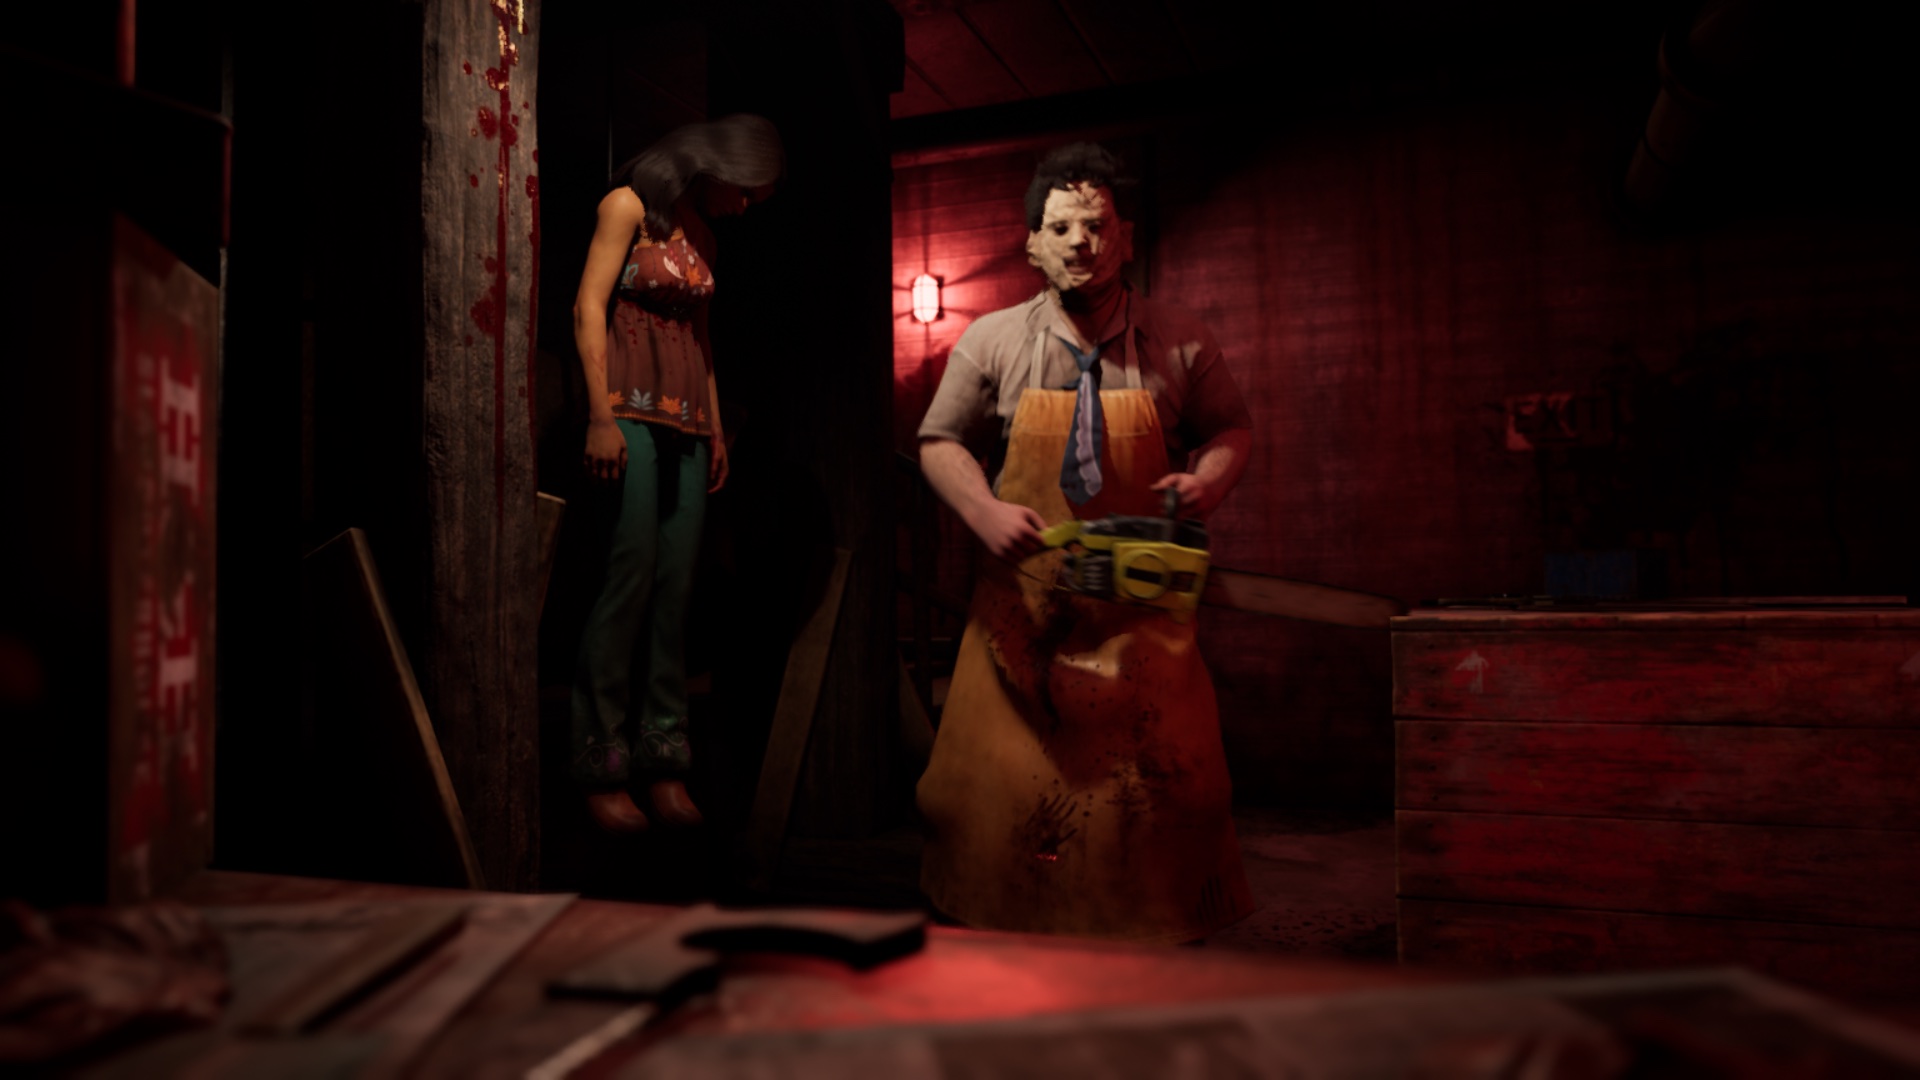 Texas Chainsaw Massacre - LEATHERFACE Licensed Game: New Trailer